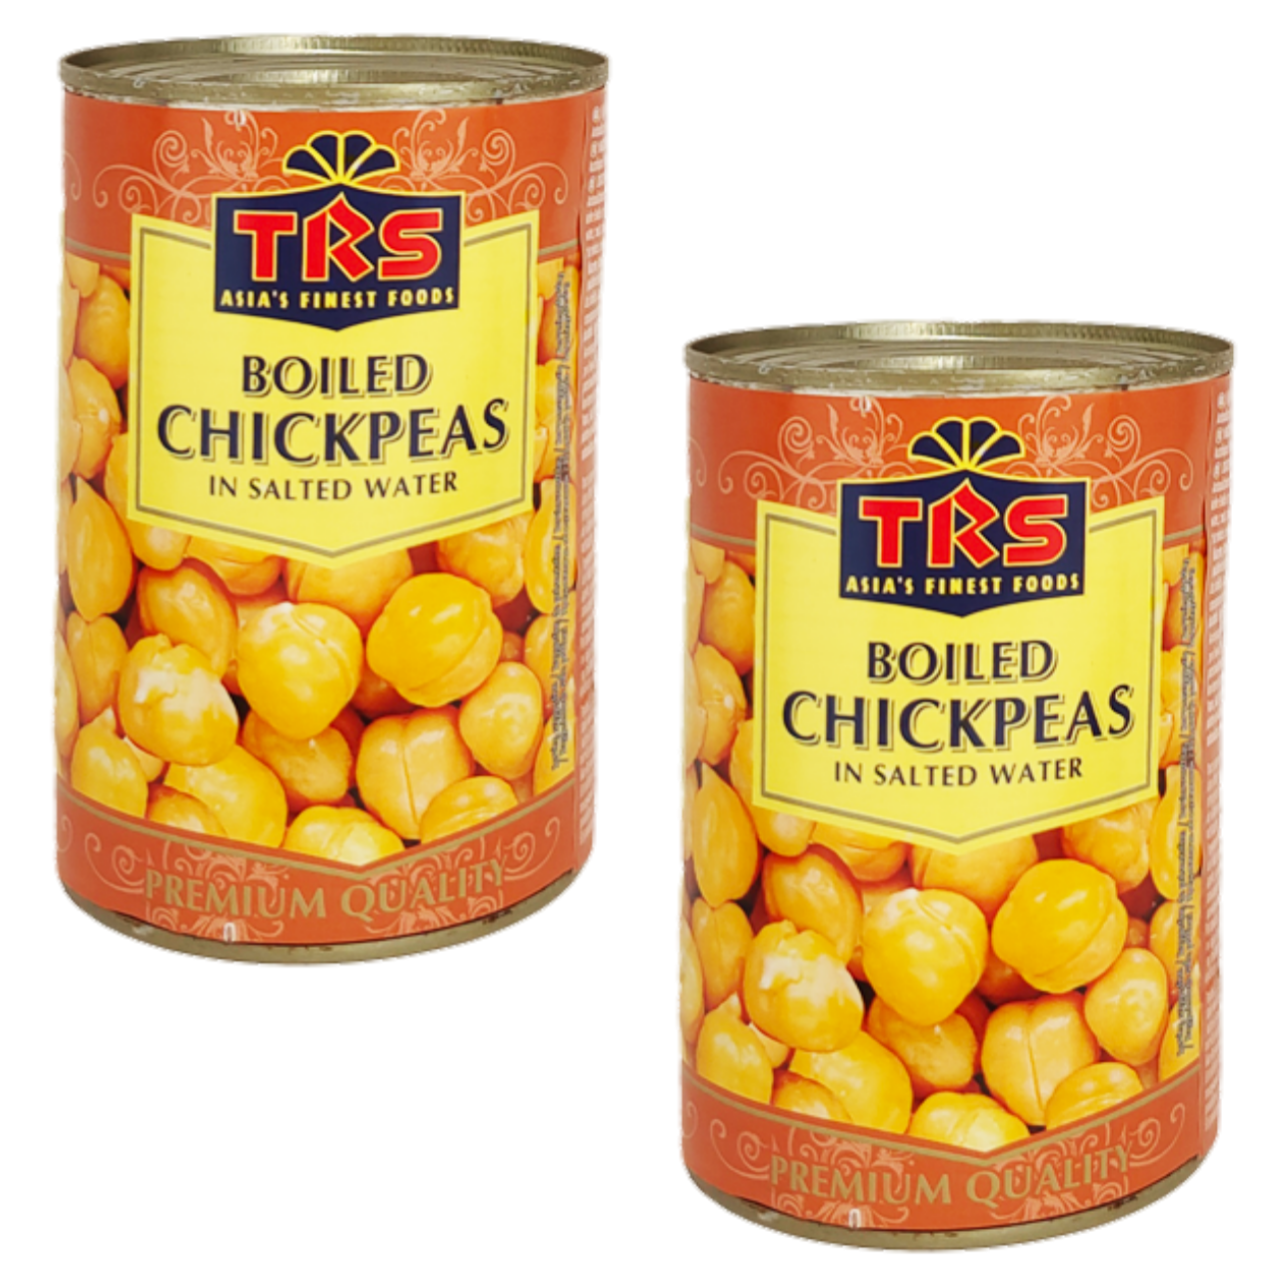 TRS Canned Boiled Chickpeas Tin (Bundle of 2 x 400g)